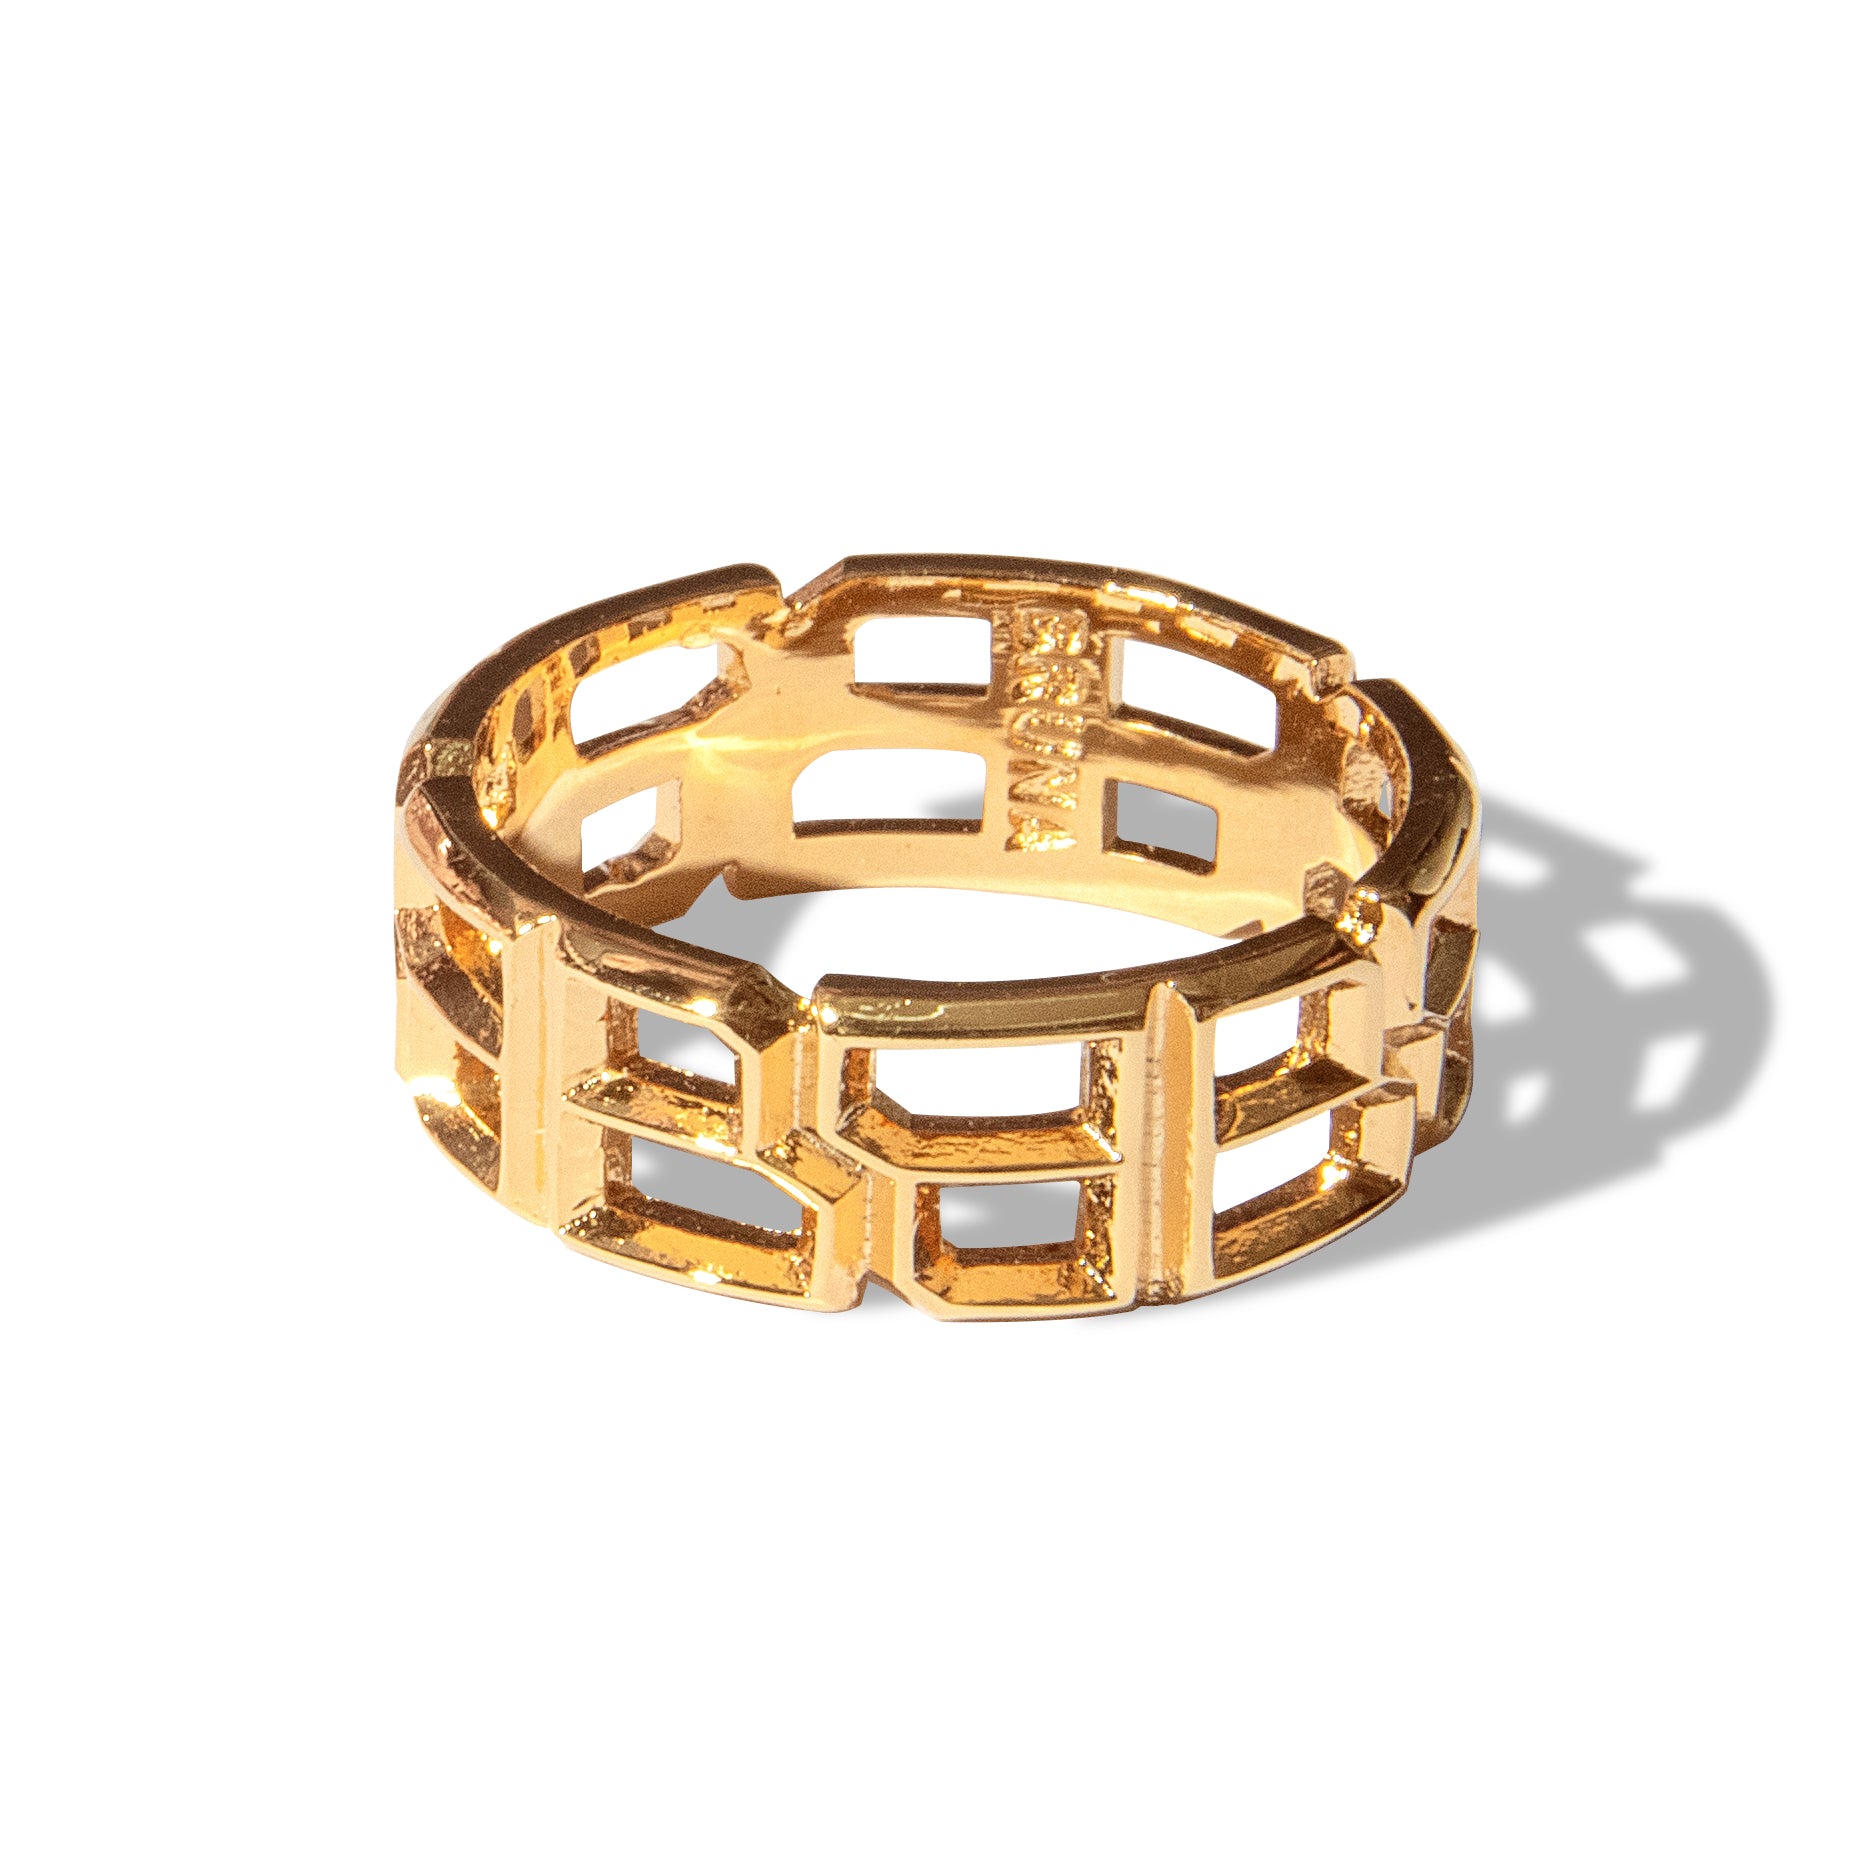 THE SIGNATURE RING - GOLD PLATED RING - 8 MM